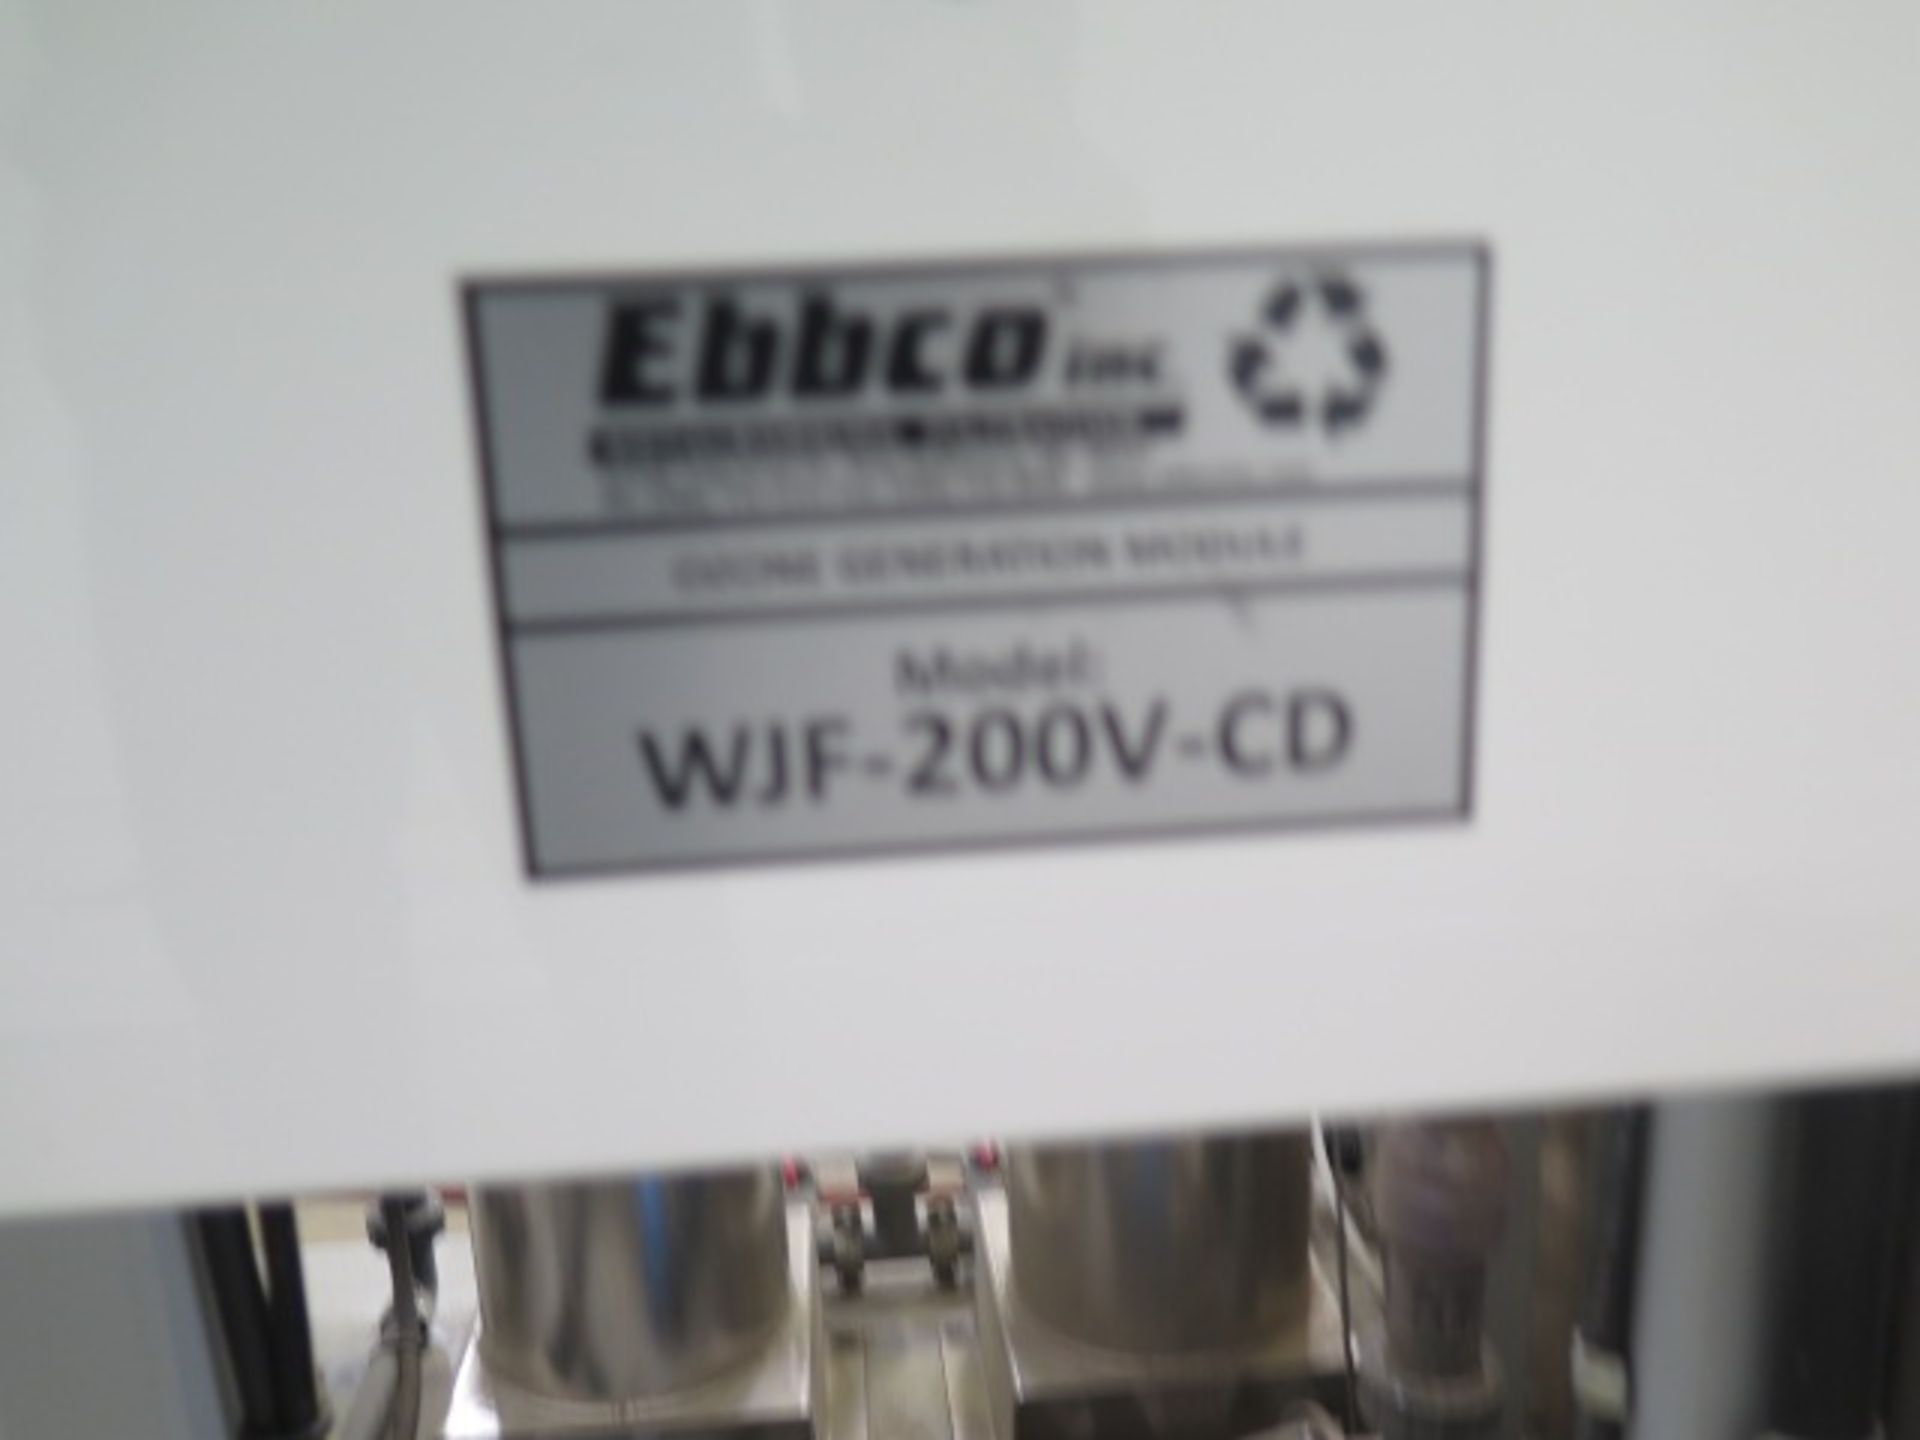 Ebbco “TEAevo Tech” Closed Loop Chiller Unit, Ebbco WJF-200V-CD Filtration System and Storage Tank - Image 7 of 8